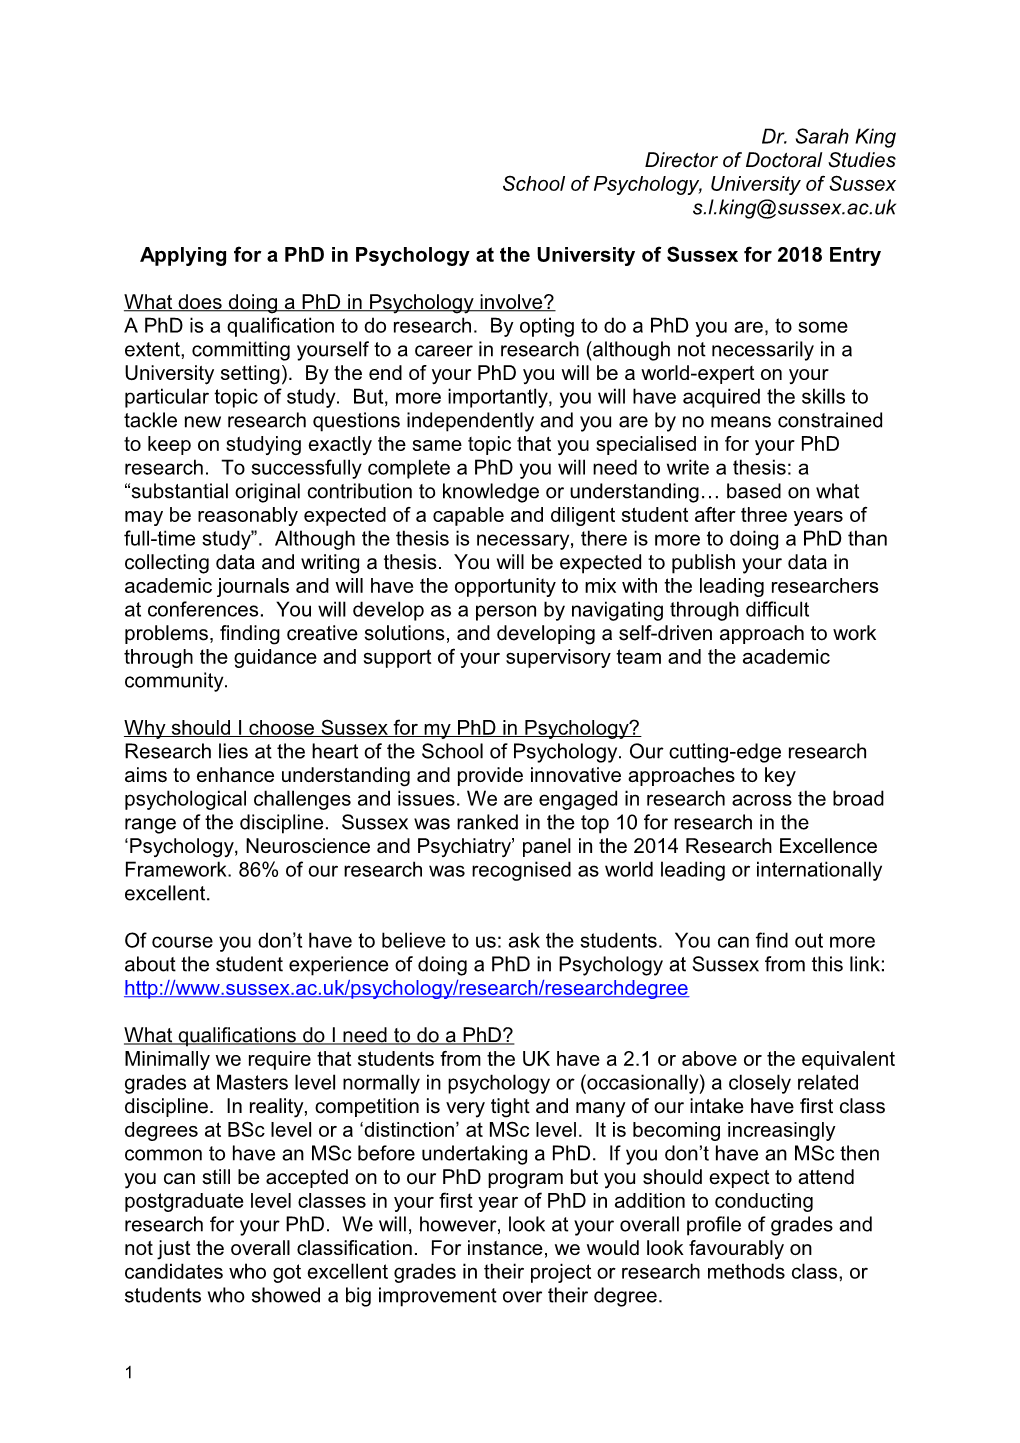 Applying for a Phd in Psychology at the University of Sussex for 2018 Entry